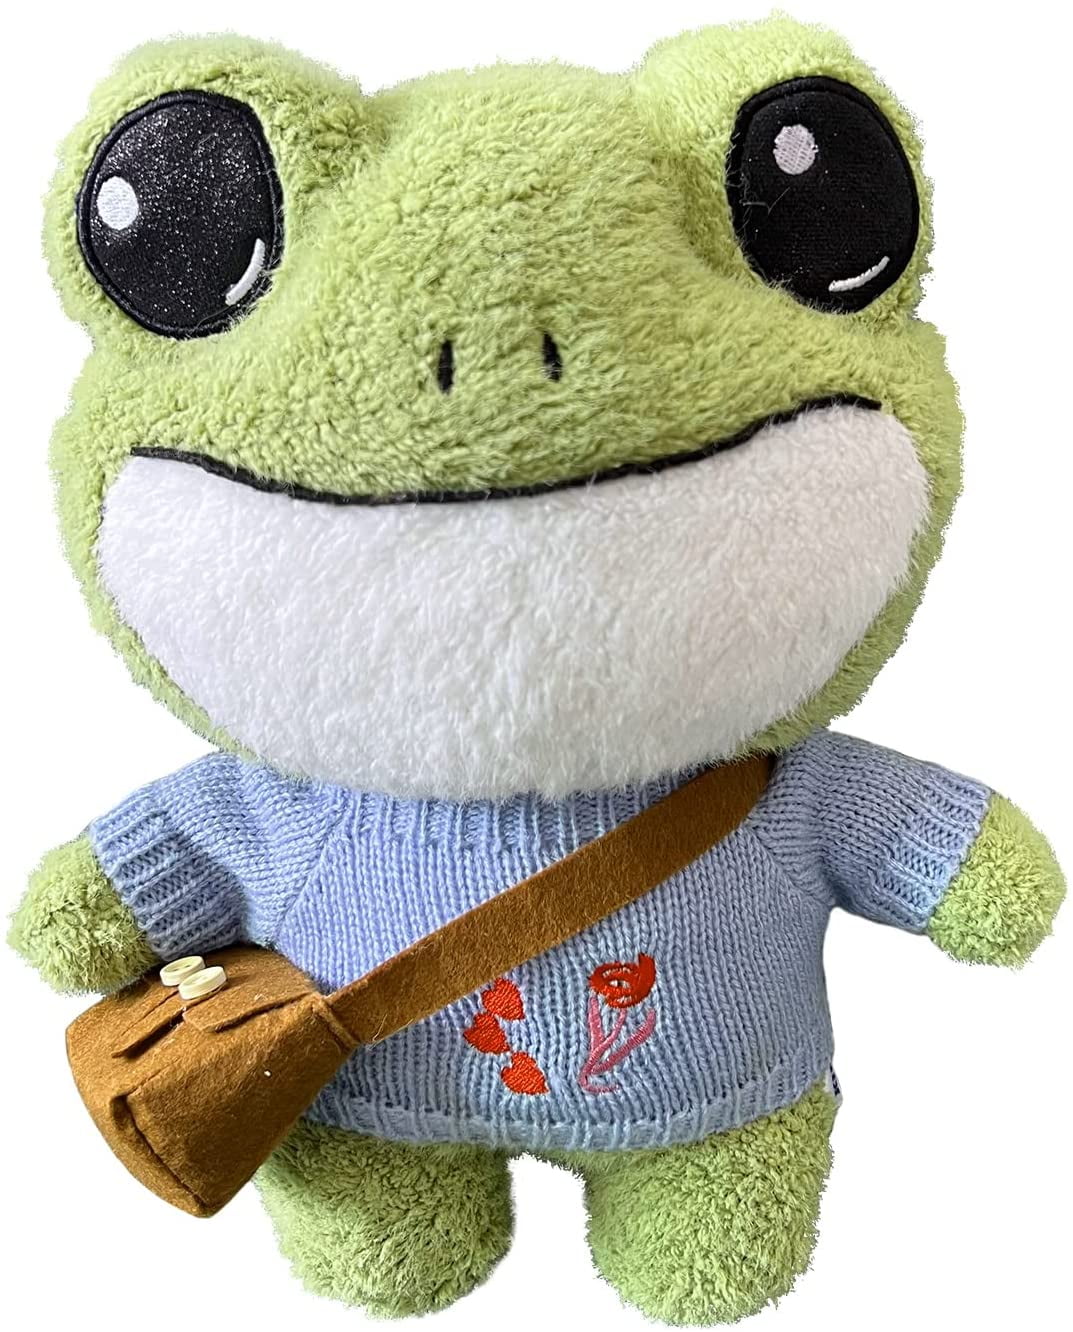 Kufutee Cute Frog Plush Stuffed Animal w/ Sweater Clothes & Backpack, Soft Frog Plush Doll Toys, Fluffy Toy Frog Plushie Christmas Birthday Gifts for